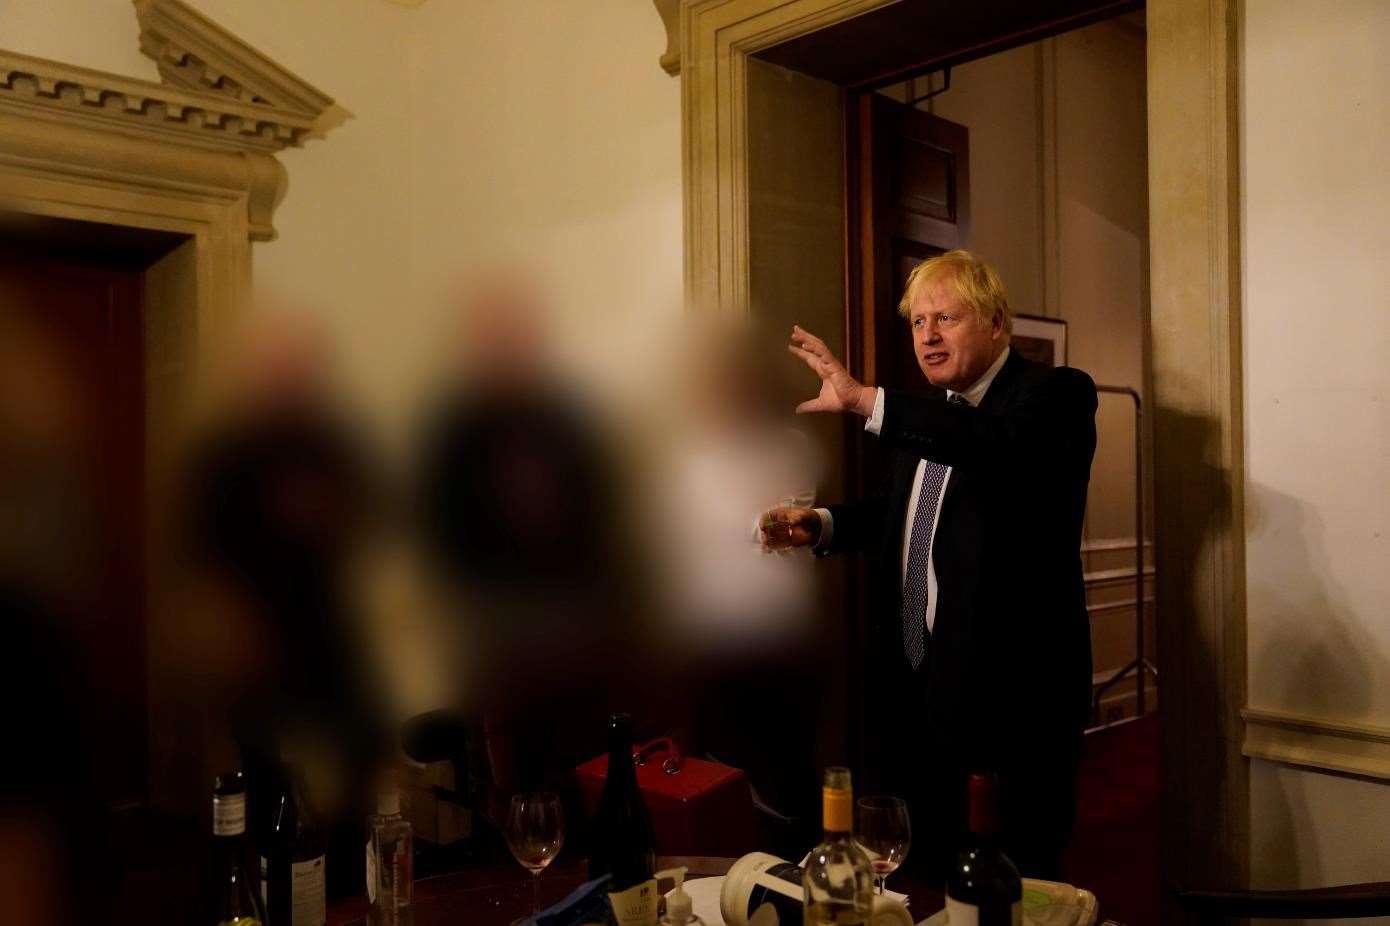 Boris Johnson pictured at a gathering in 10 Downing Street during lockdown (Sue Gray Report/Cabinet Office/PA)